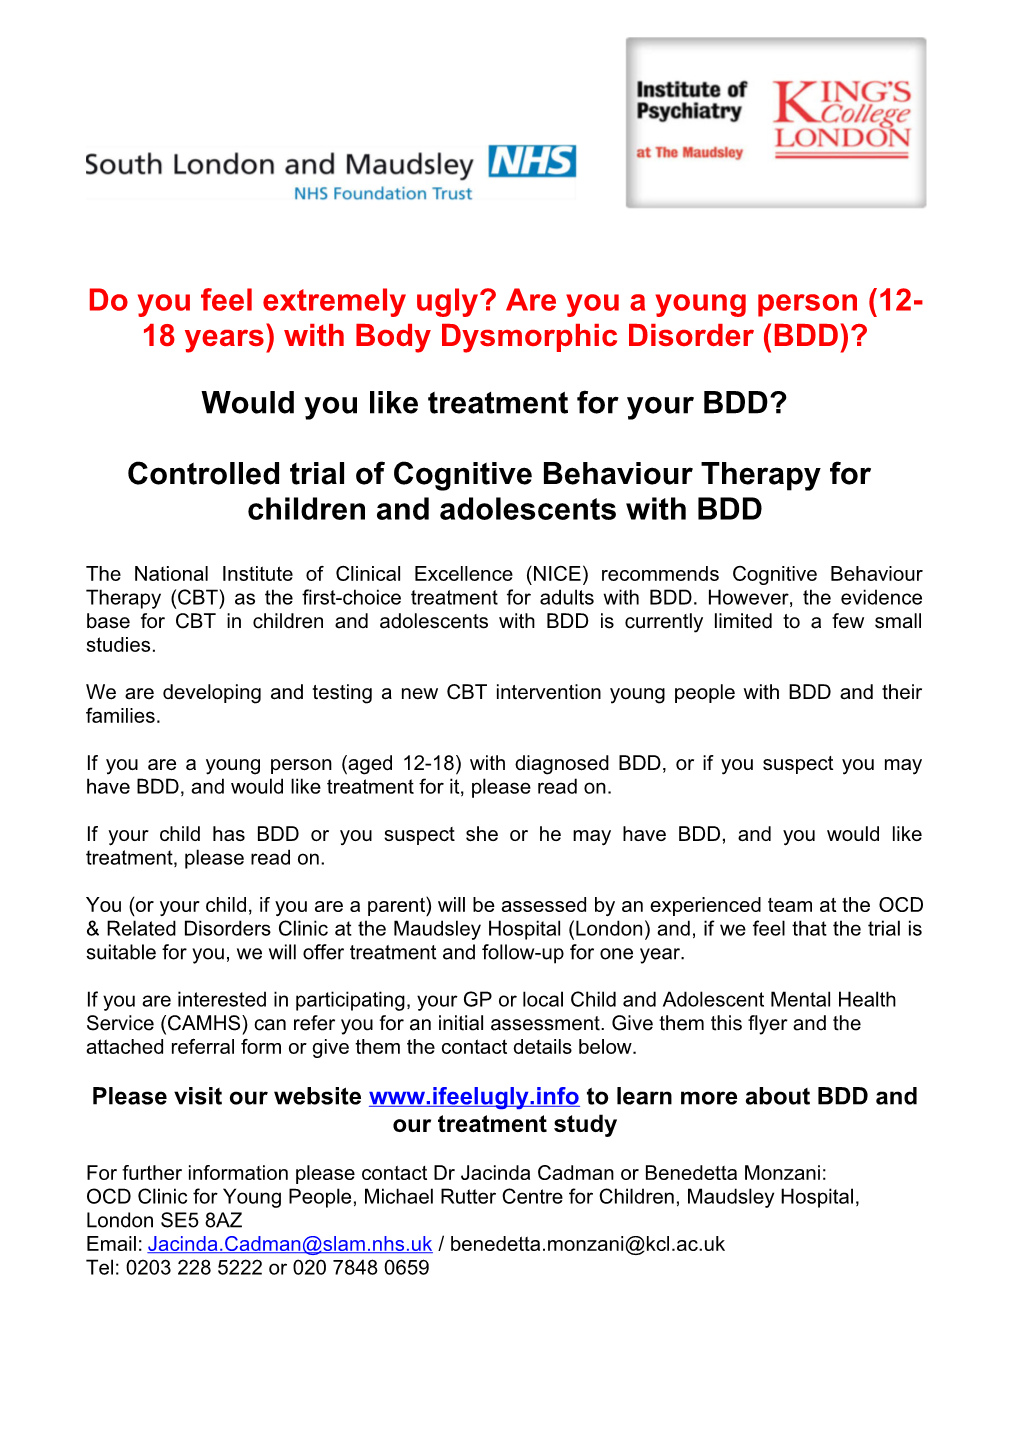 Are You a Young Person with Obsessive Compulsive Disorder